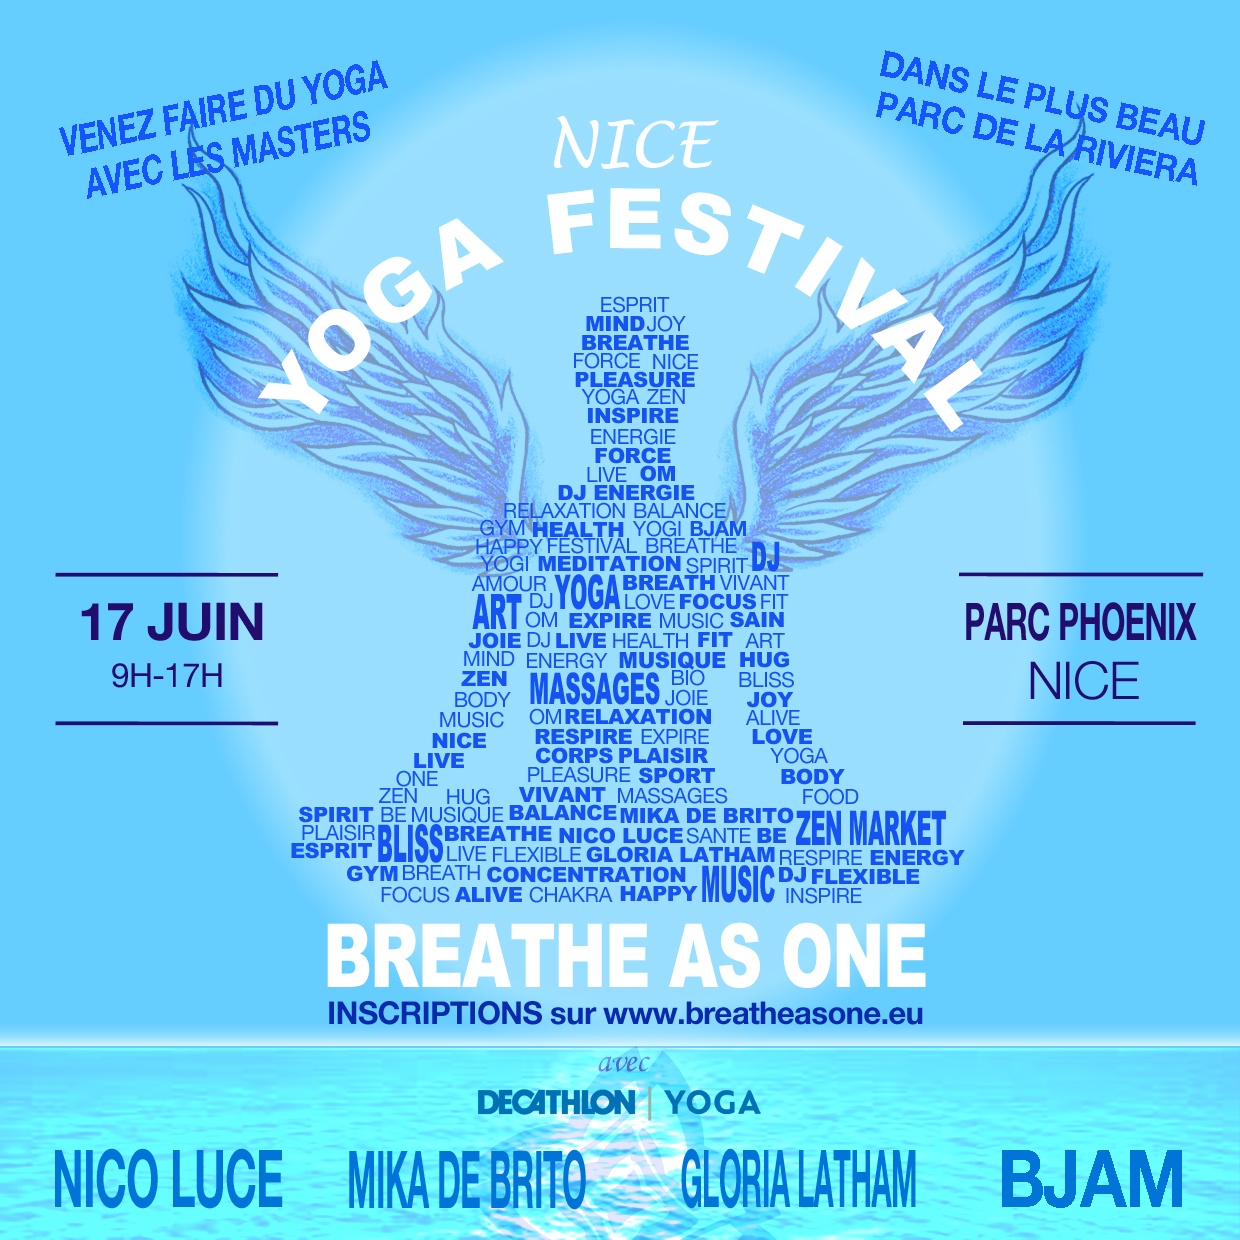 You are currently viewing FREE Yoga Day on June 17th in Nice